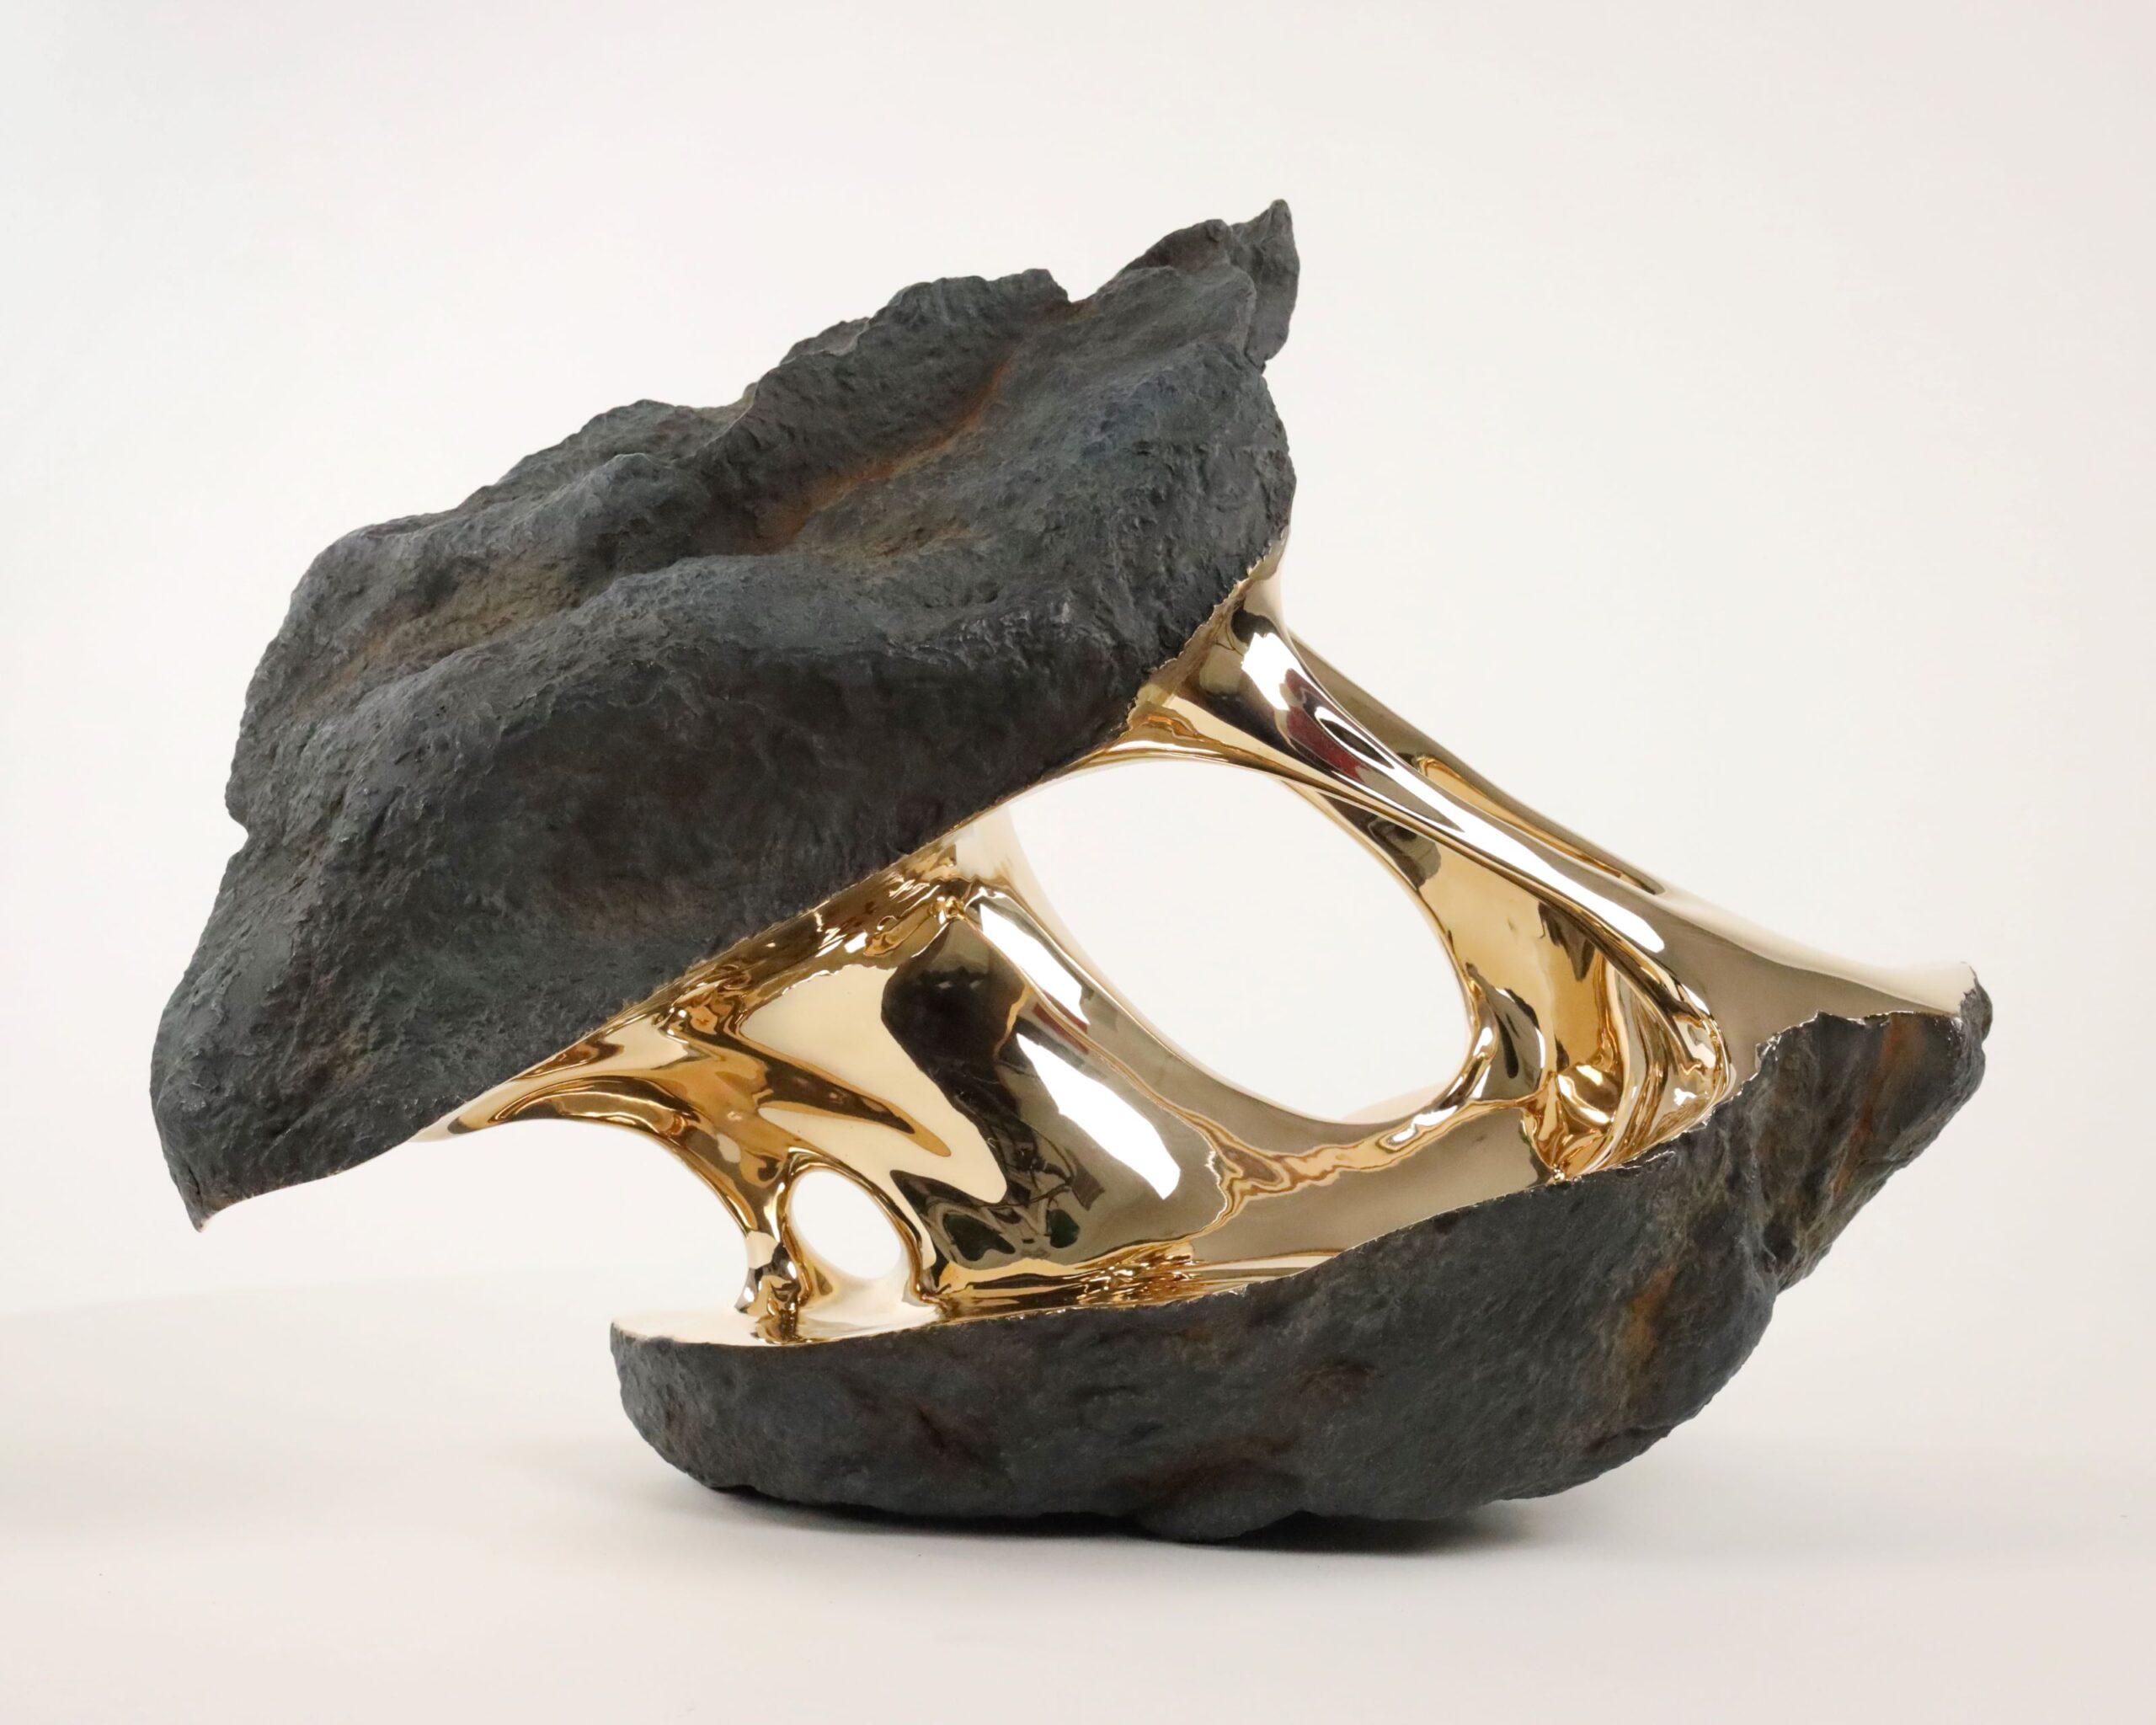 Alchemy by Romain Langlois - Rock-like bronze sculpture, golden, abstract For Sale 7